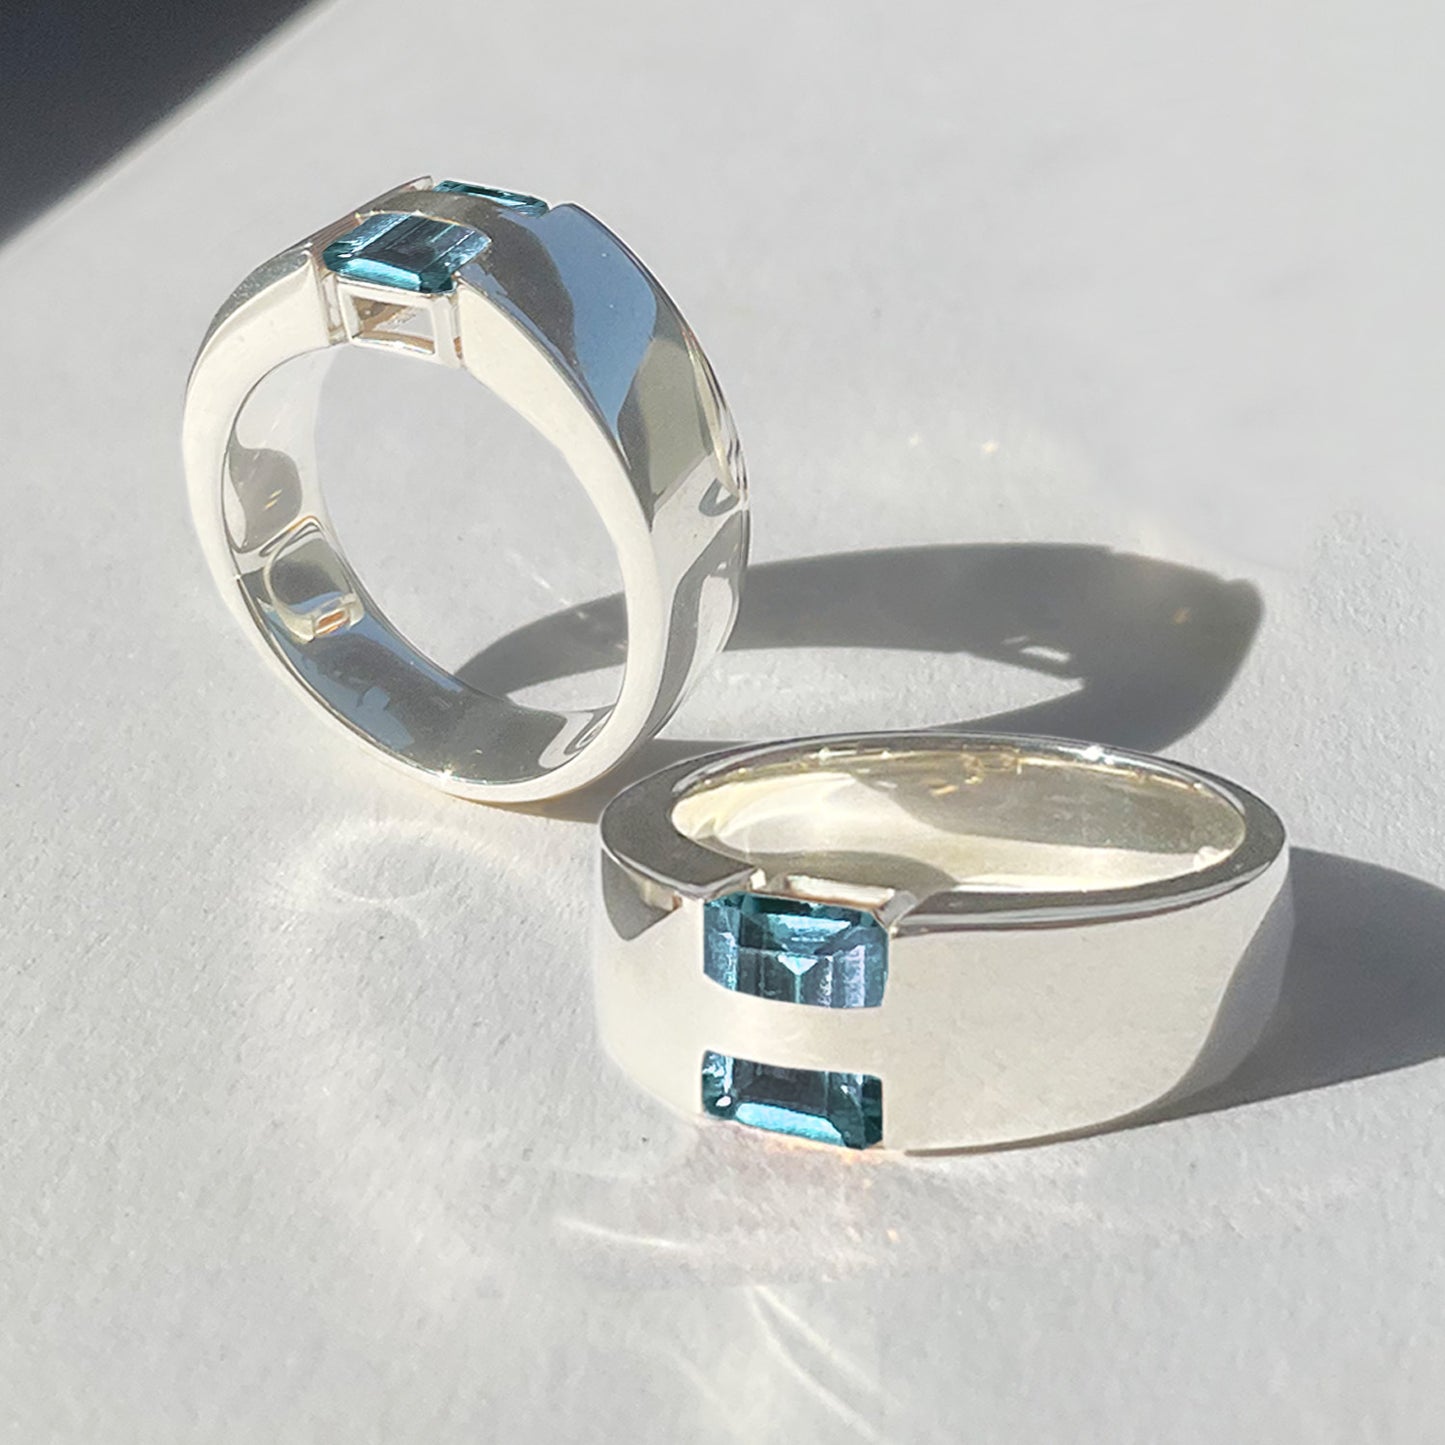 [Blue topaz] hide and sparkle silver #exploring